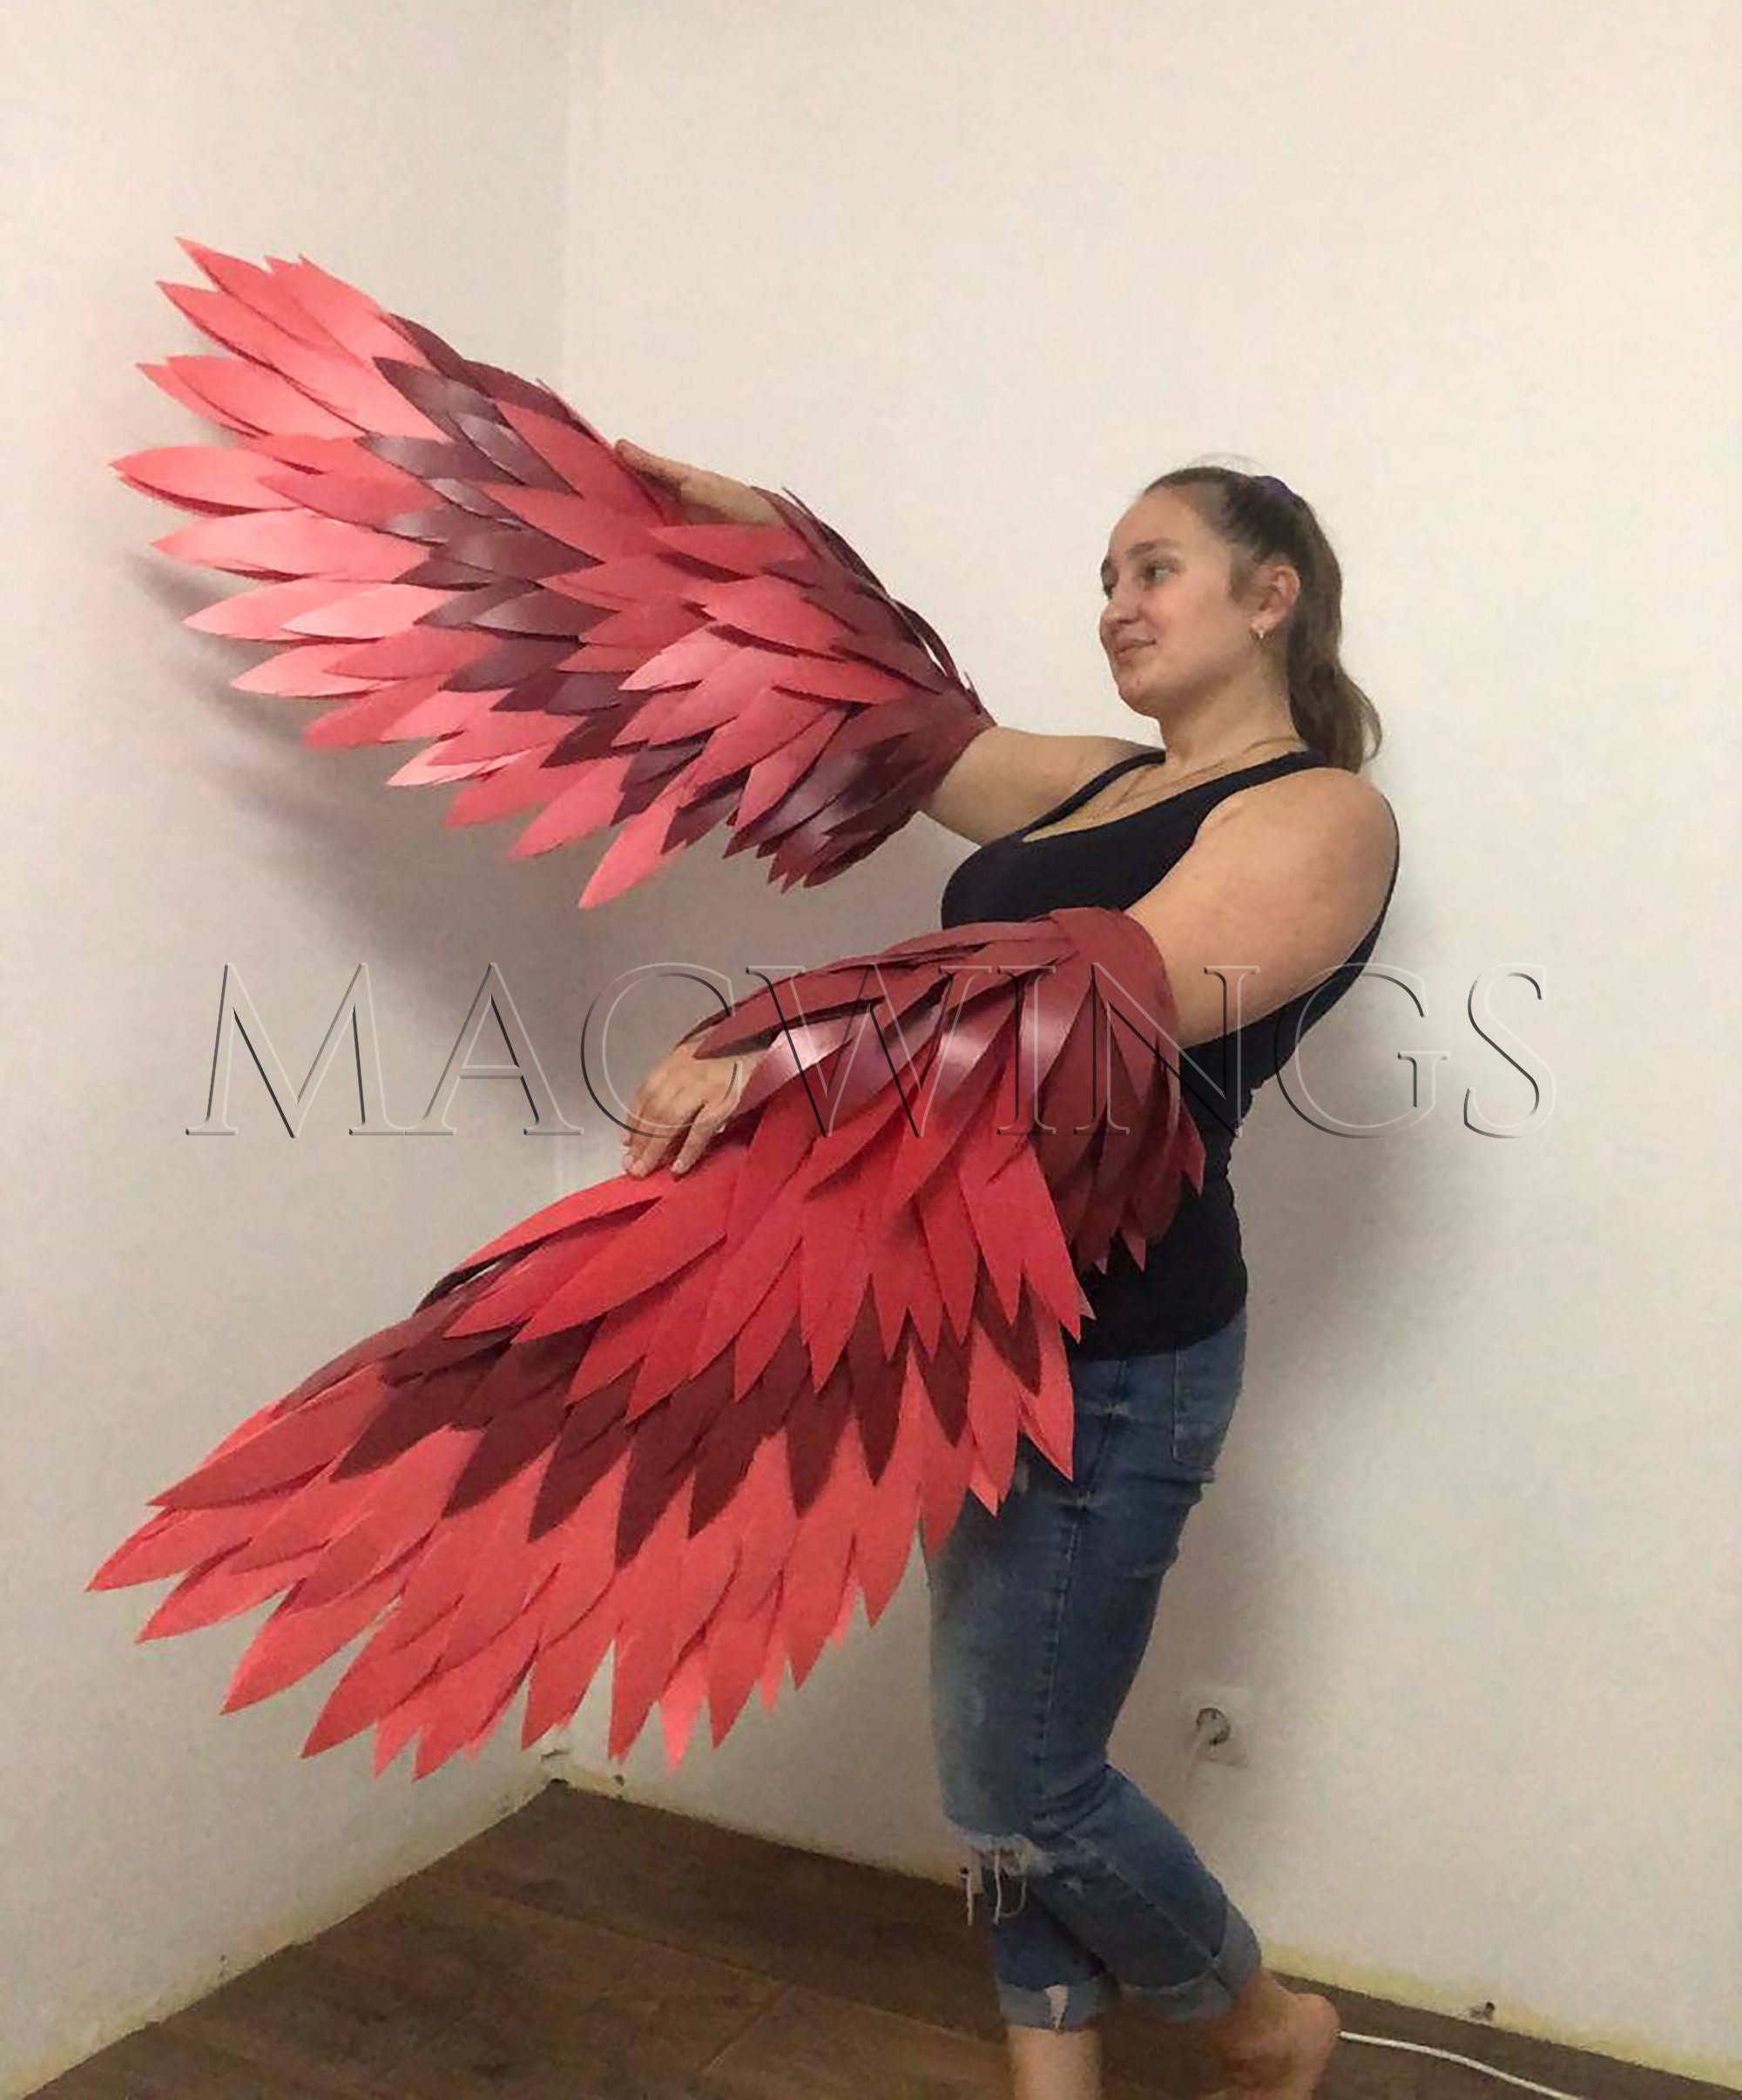 White Bird Wings and Tail, Bird Wings, Arm Wings, Bird Tail, Bird Costume  Cosplay, Harpy Costume, Flexible Wings for Arms, Halloween Costume 